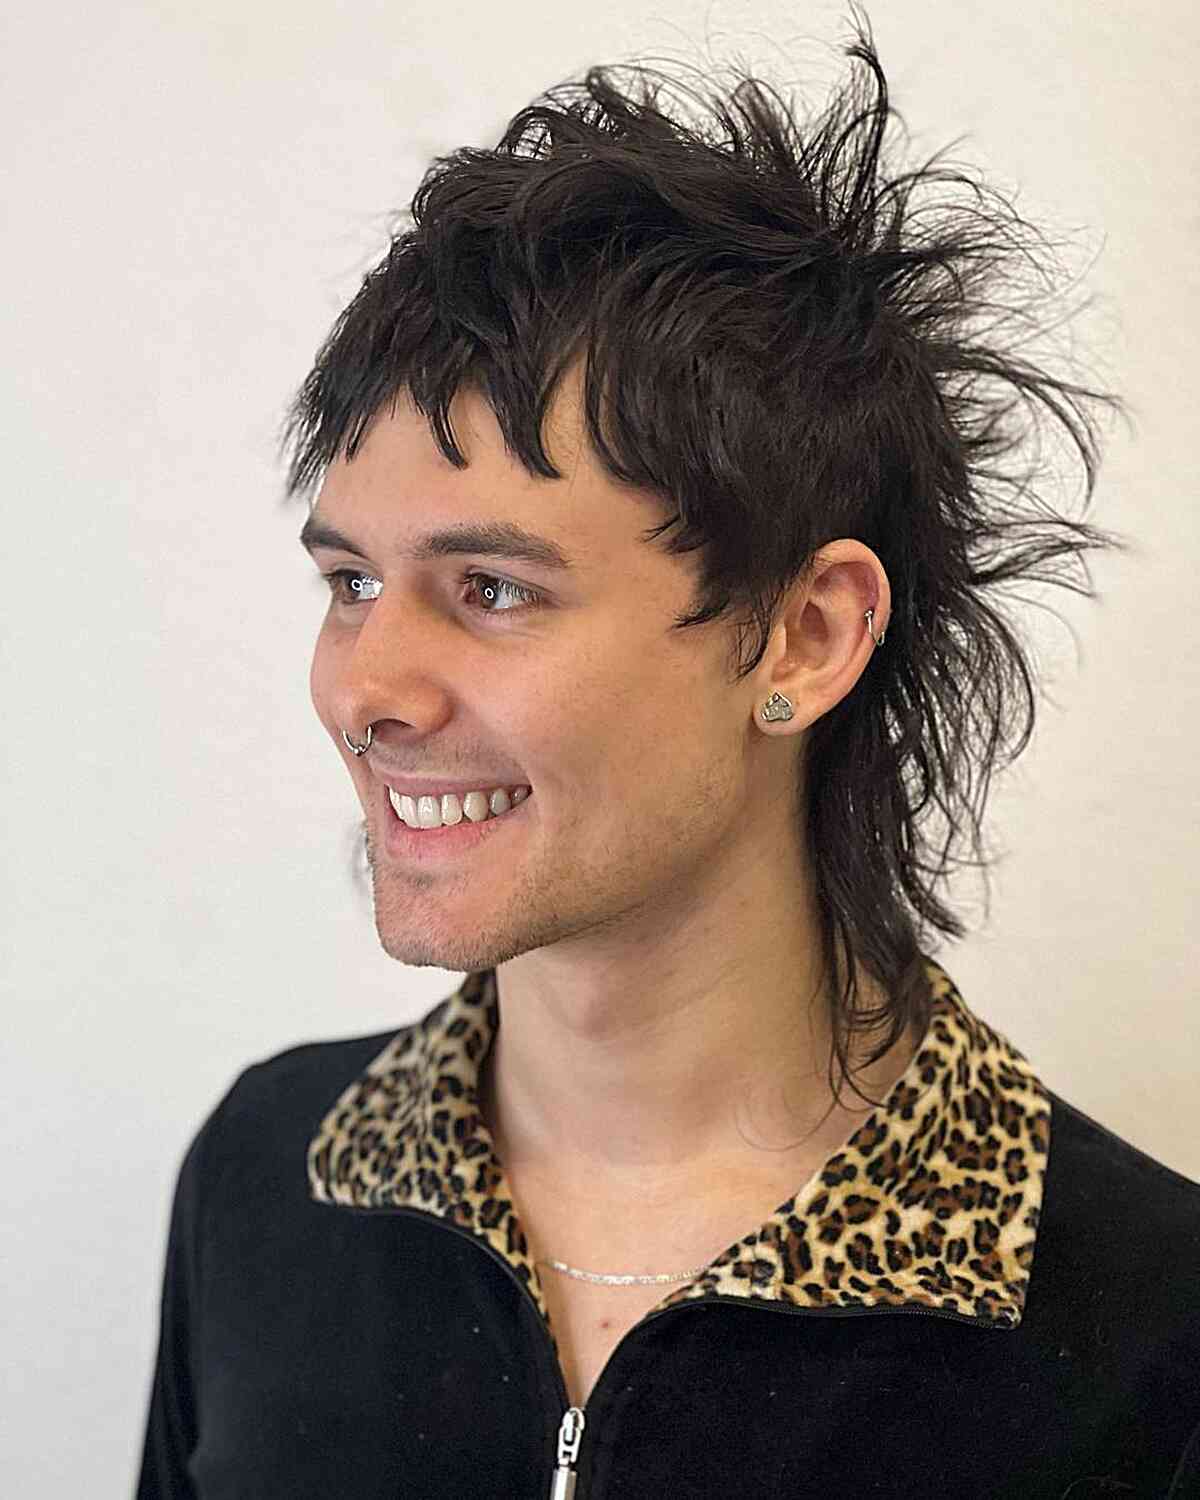 Mid-to-Long Jagged Mullet with Piece-y Bangs for Guys